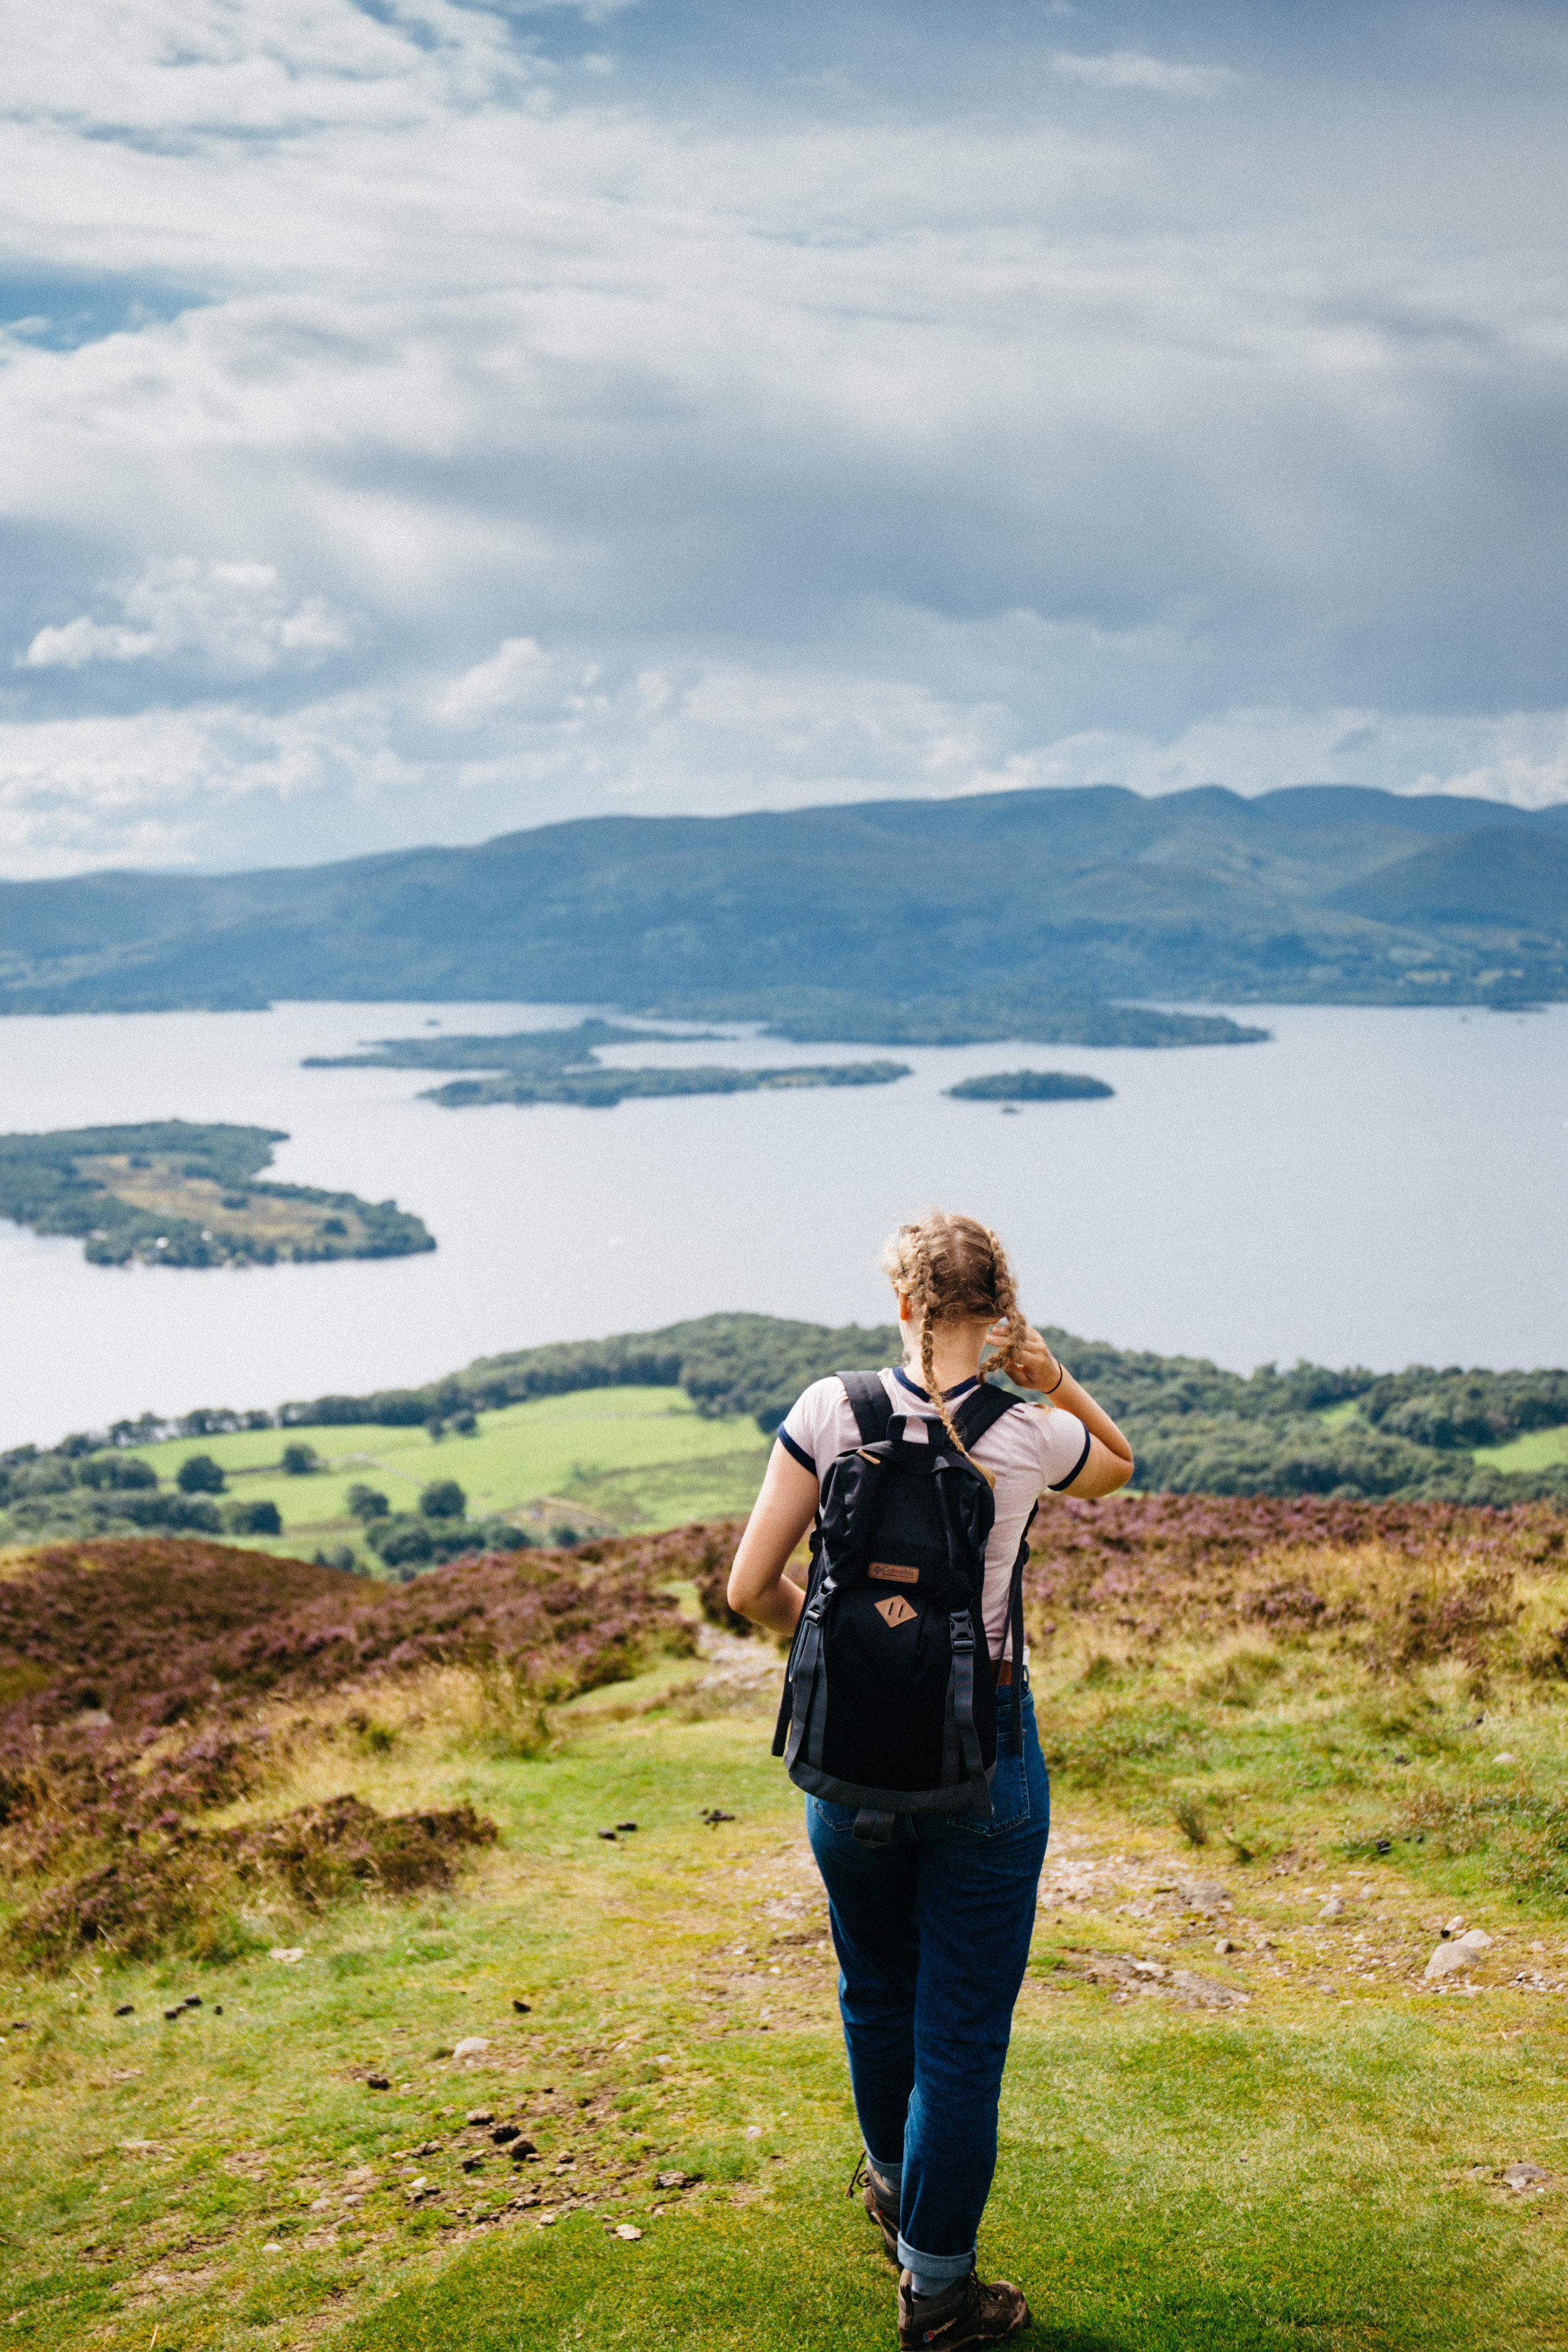 Loch Lomond: More than 1,000 bags of litter cleared from Loch Lomond  National Park in just one month